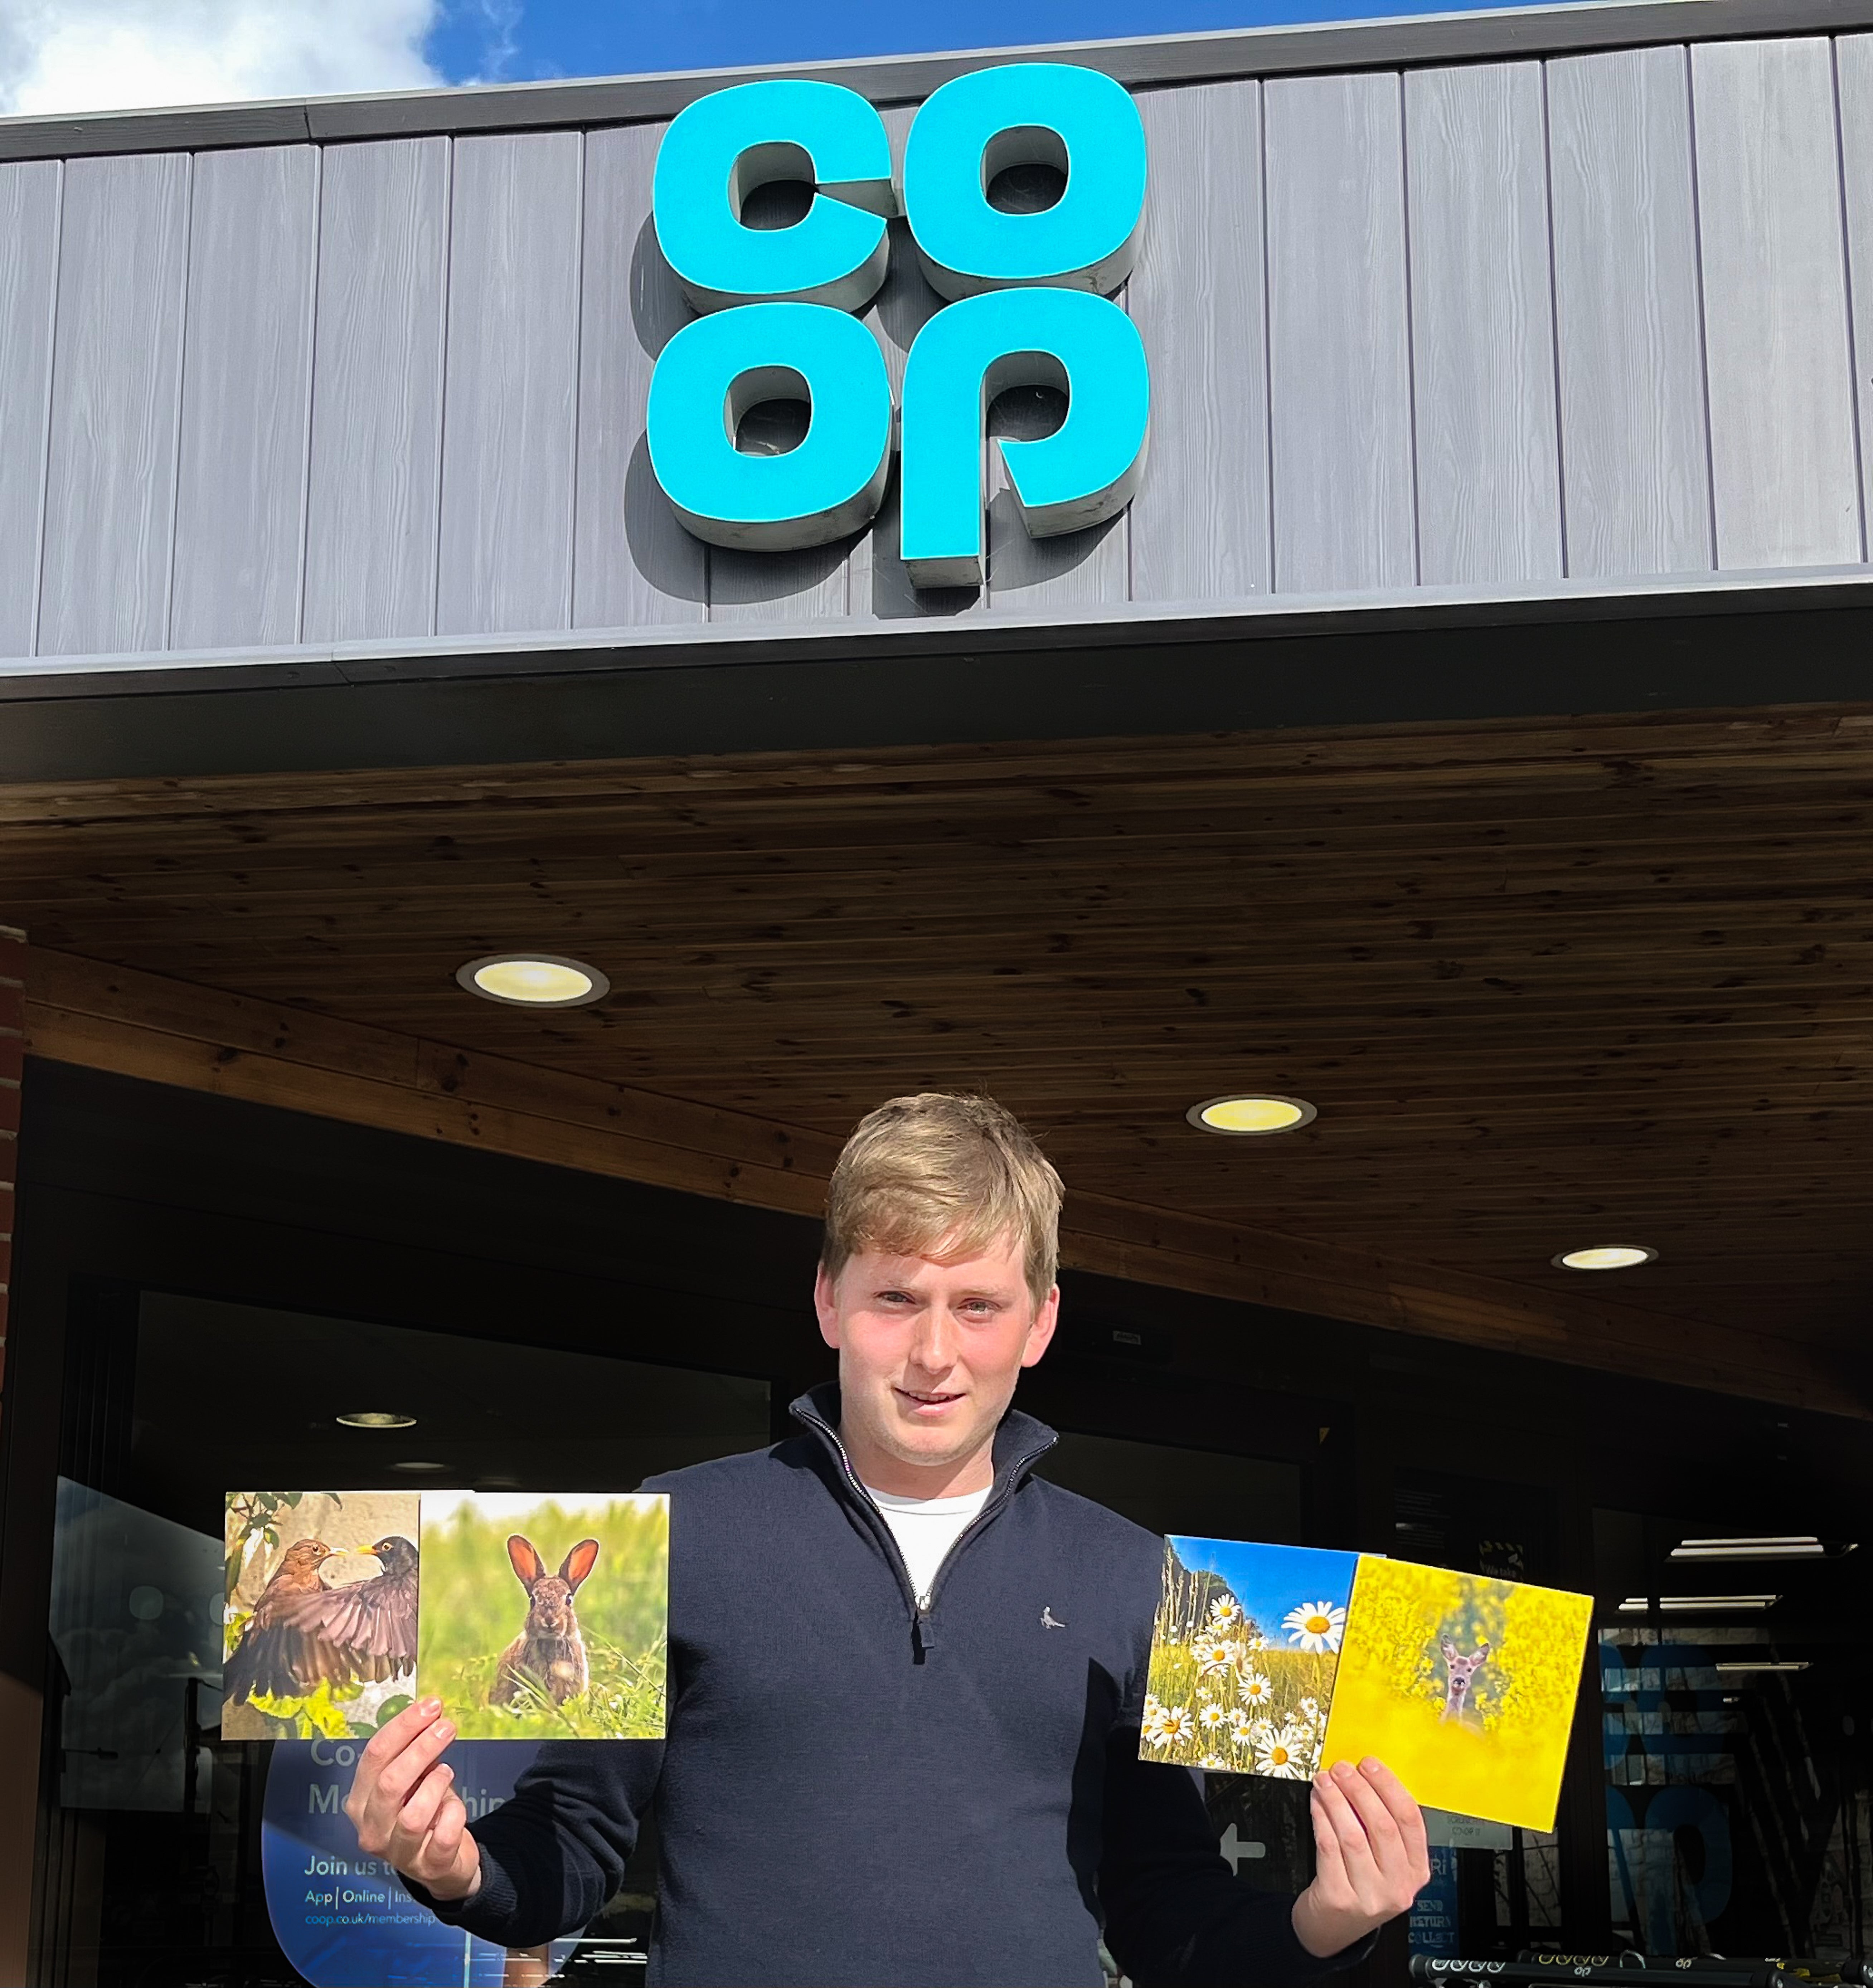 The cards will be launched in 1,300 stores and the Co-op will donate £10,000 to the RSPB